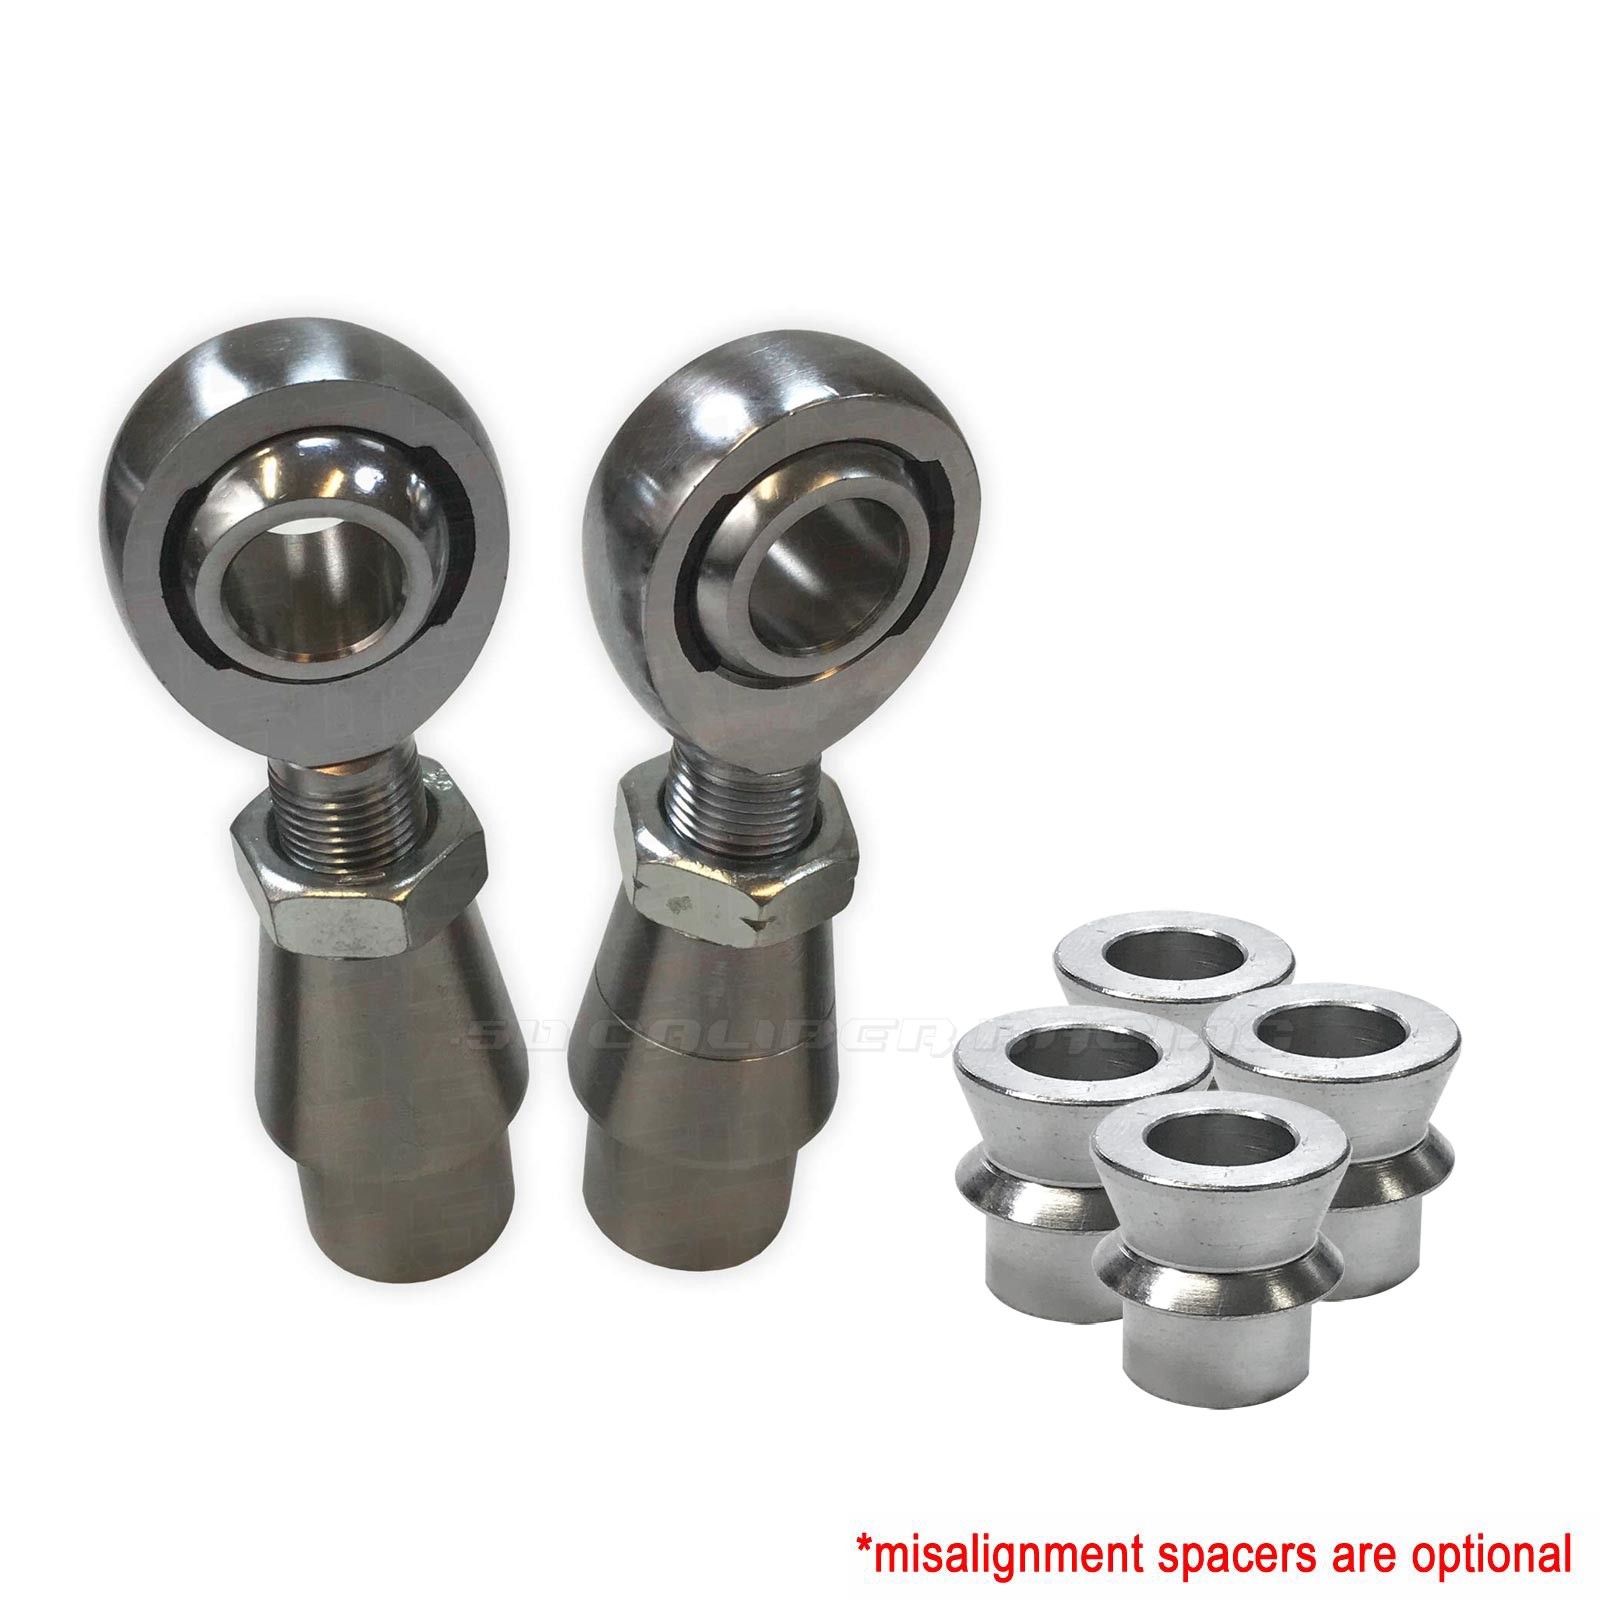 1-3/4 High Misalignment Spacer Zinc Coated Mild Steel Heim Joint Rod End Spacers 